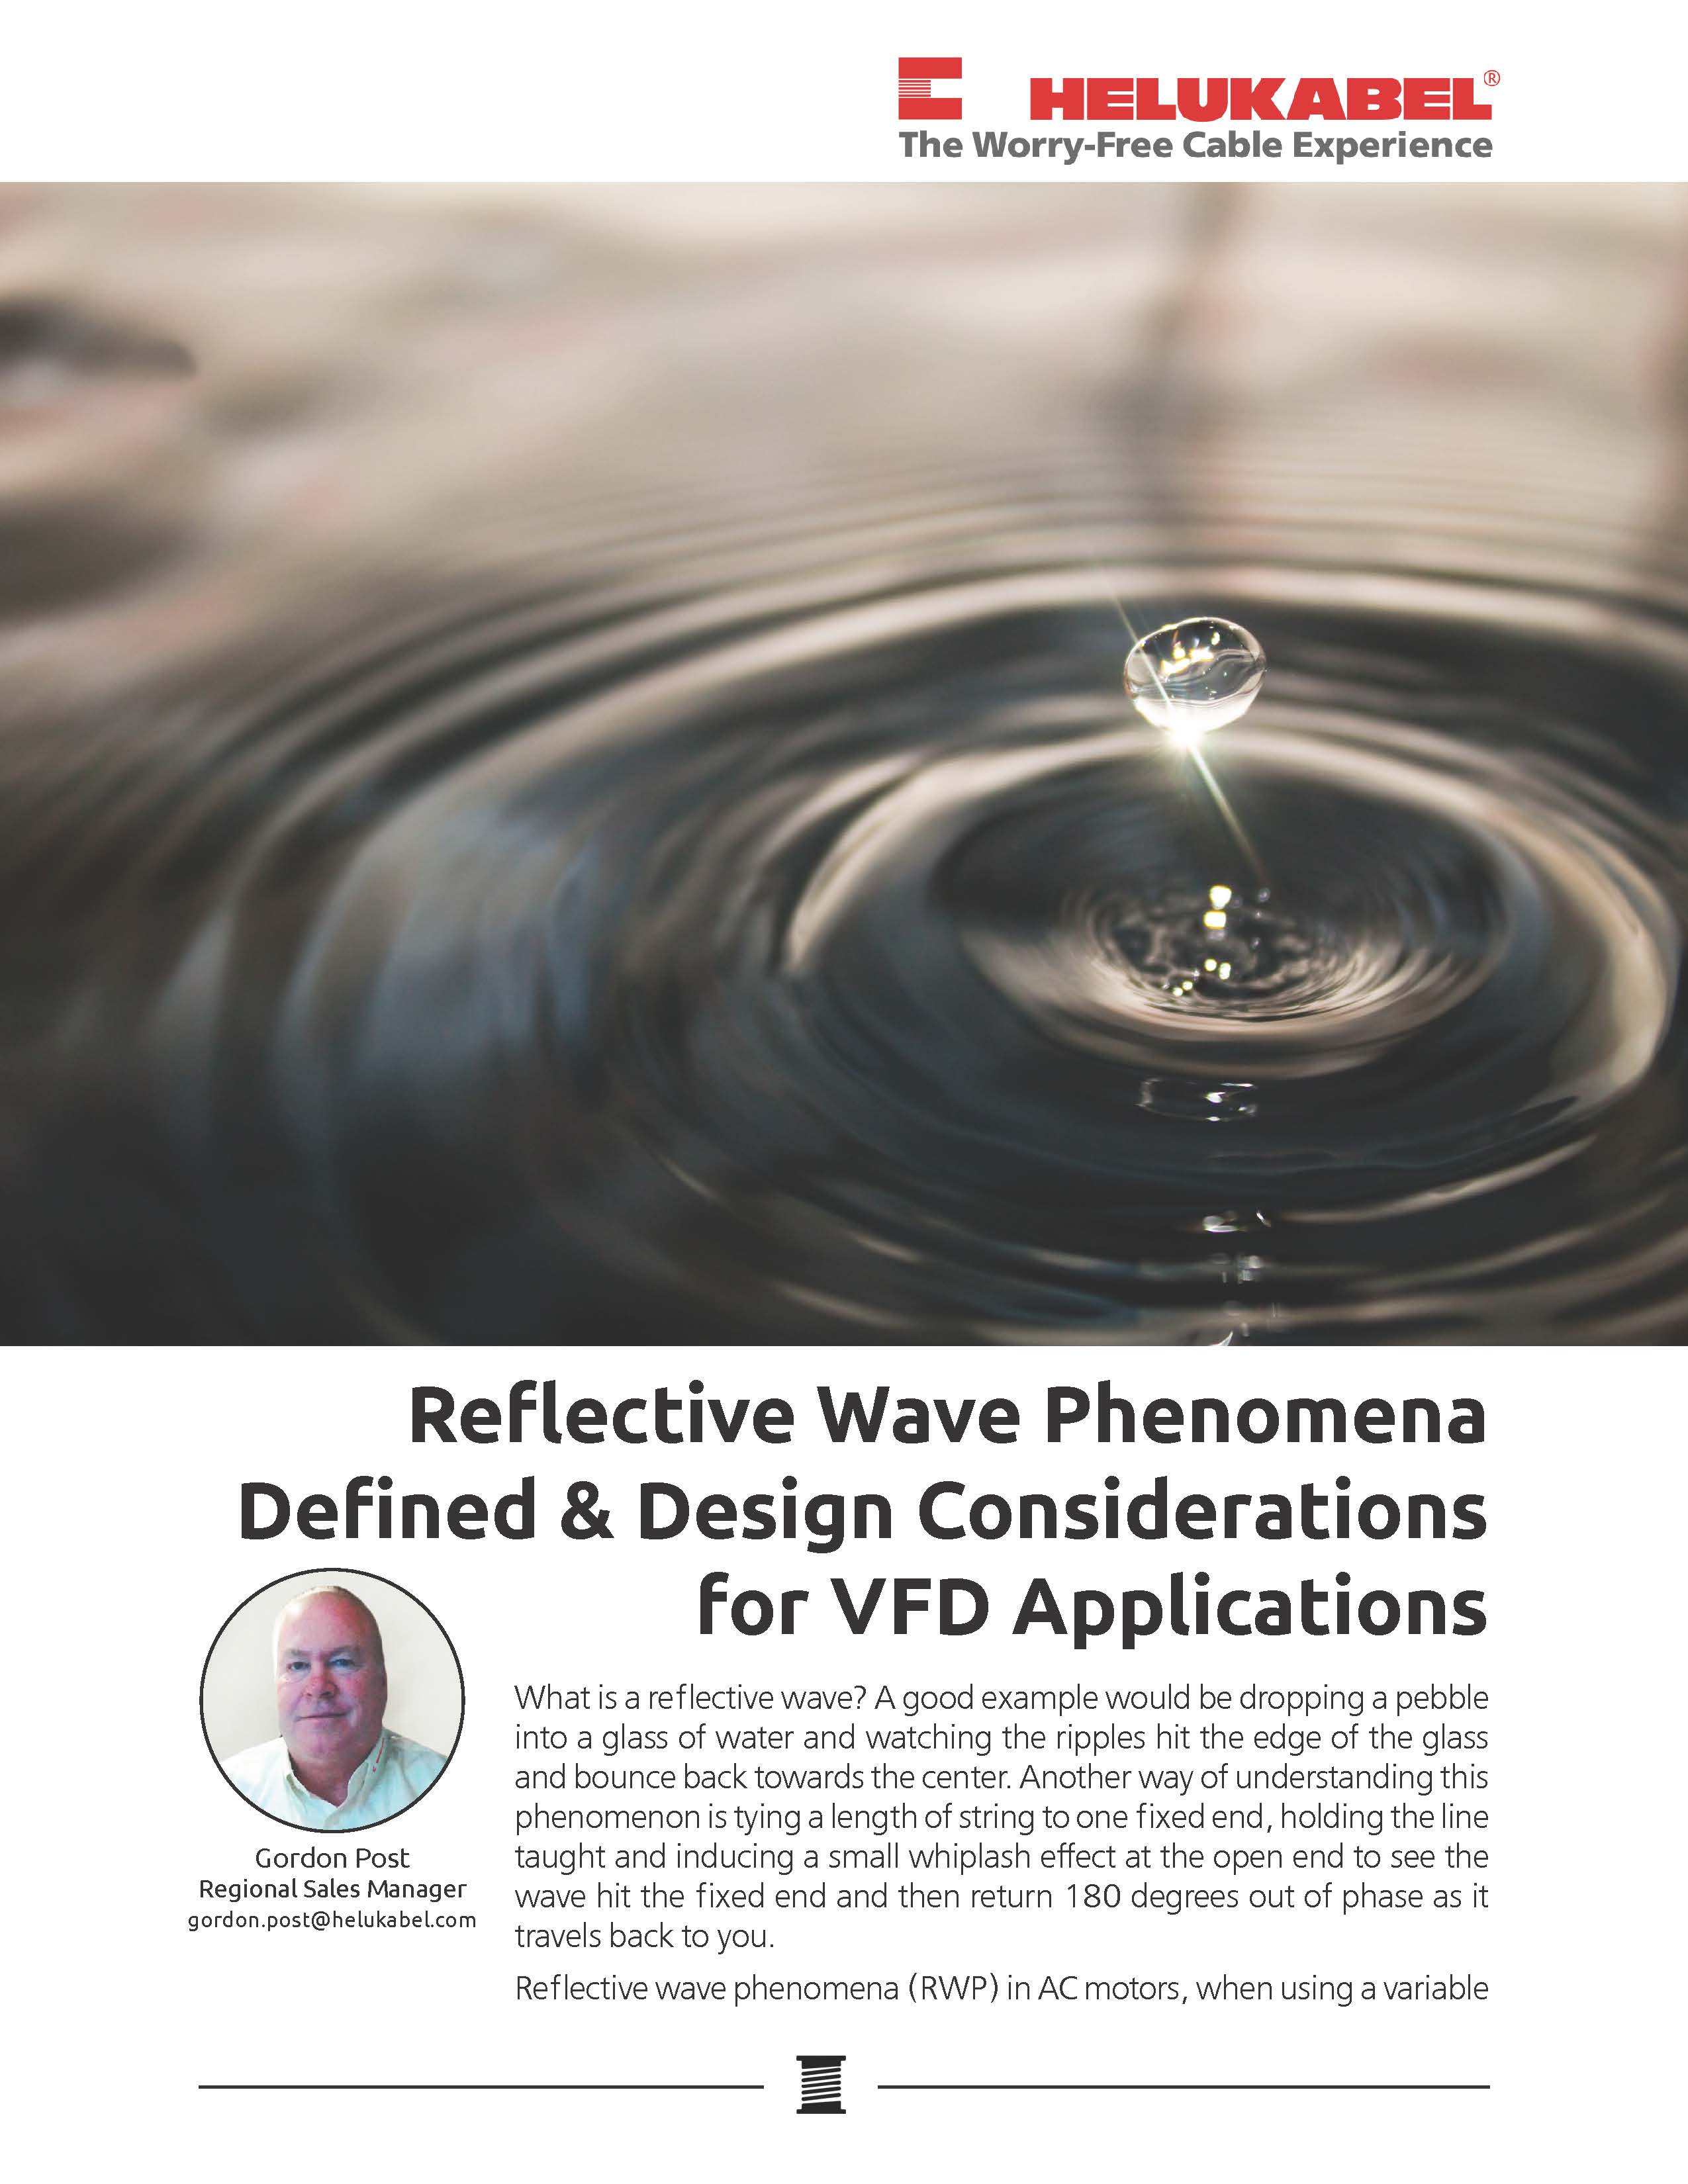 Reflective Wave Phenomena Defined & Design Considerations for VFD Applications